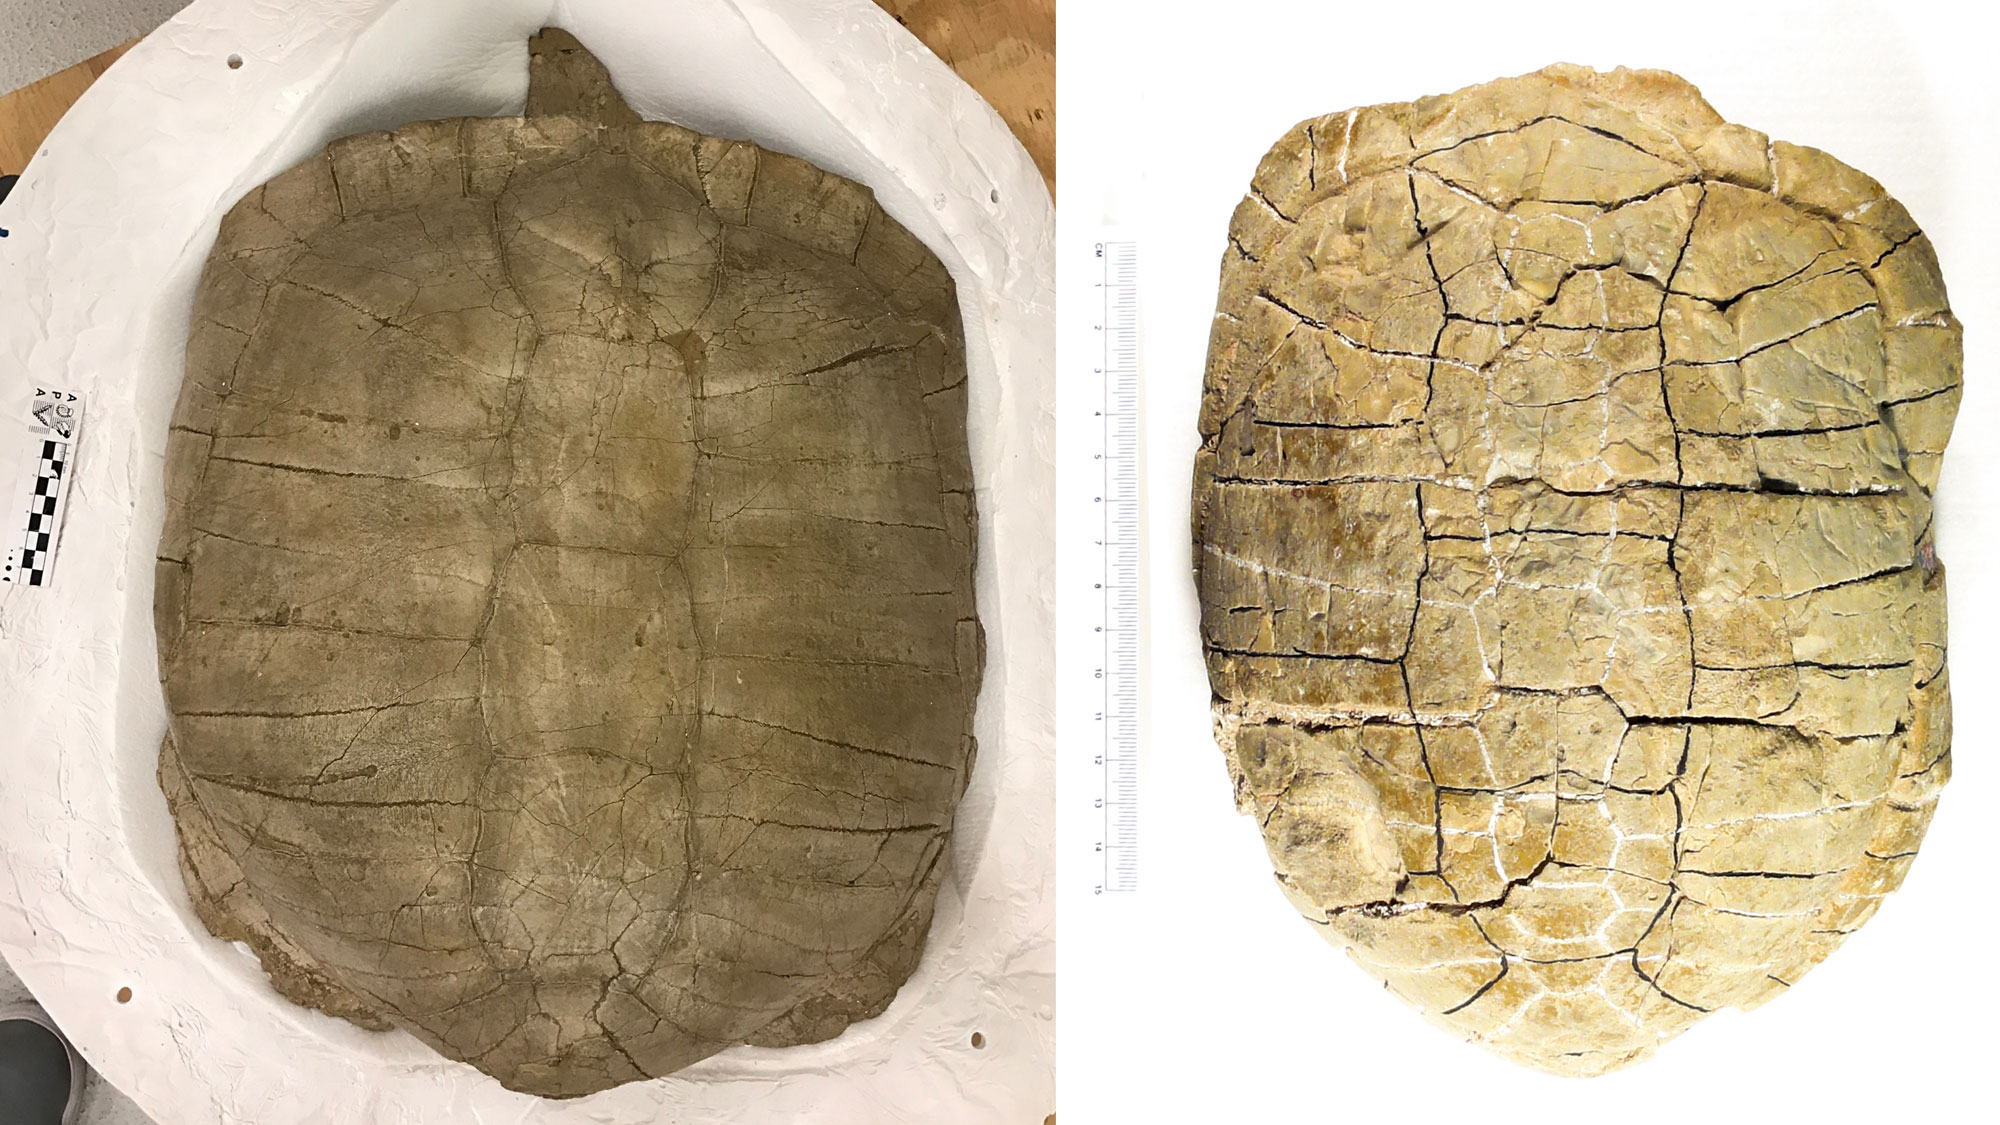 Two-panel image showing photos of fossil turtle shells from the Oligocene White River Group. The figure shows two shells from the back with the head end pointed up and the tail end down. Each is made up of a series of bony plates and is roughly oblong in shape. 